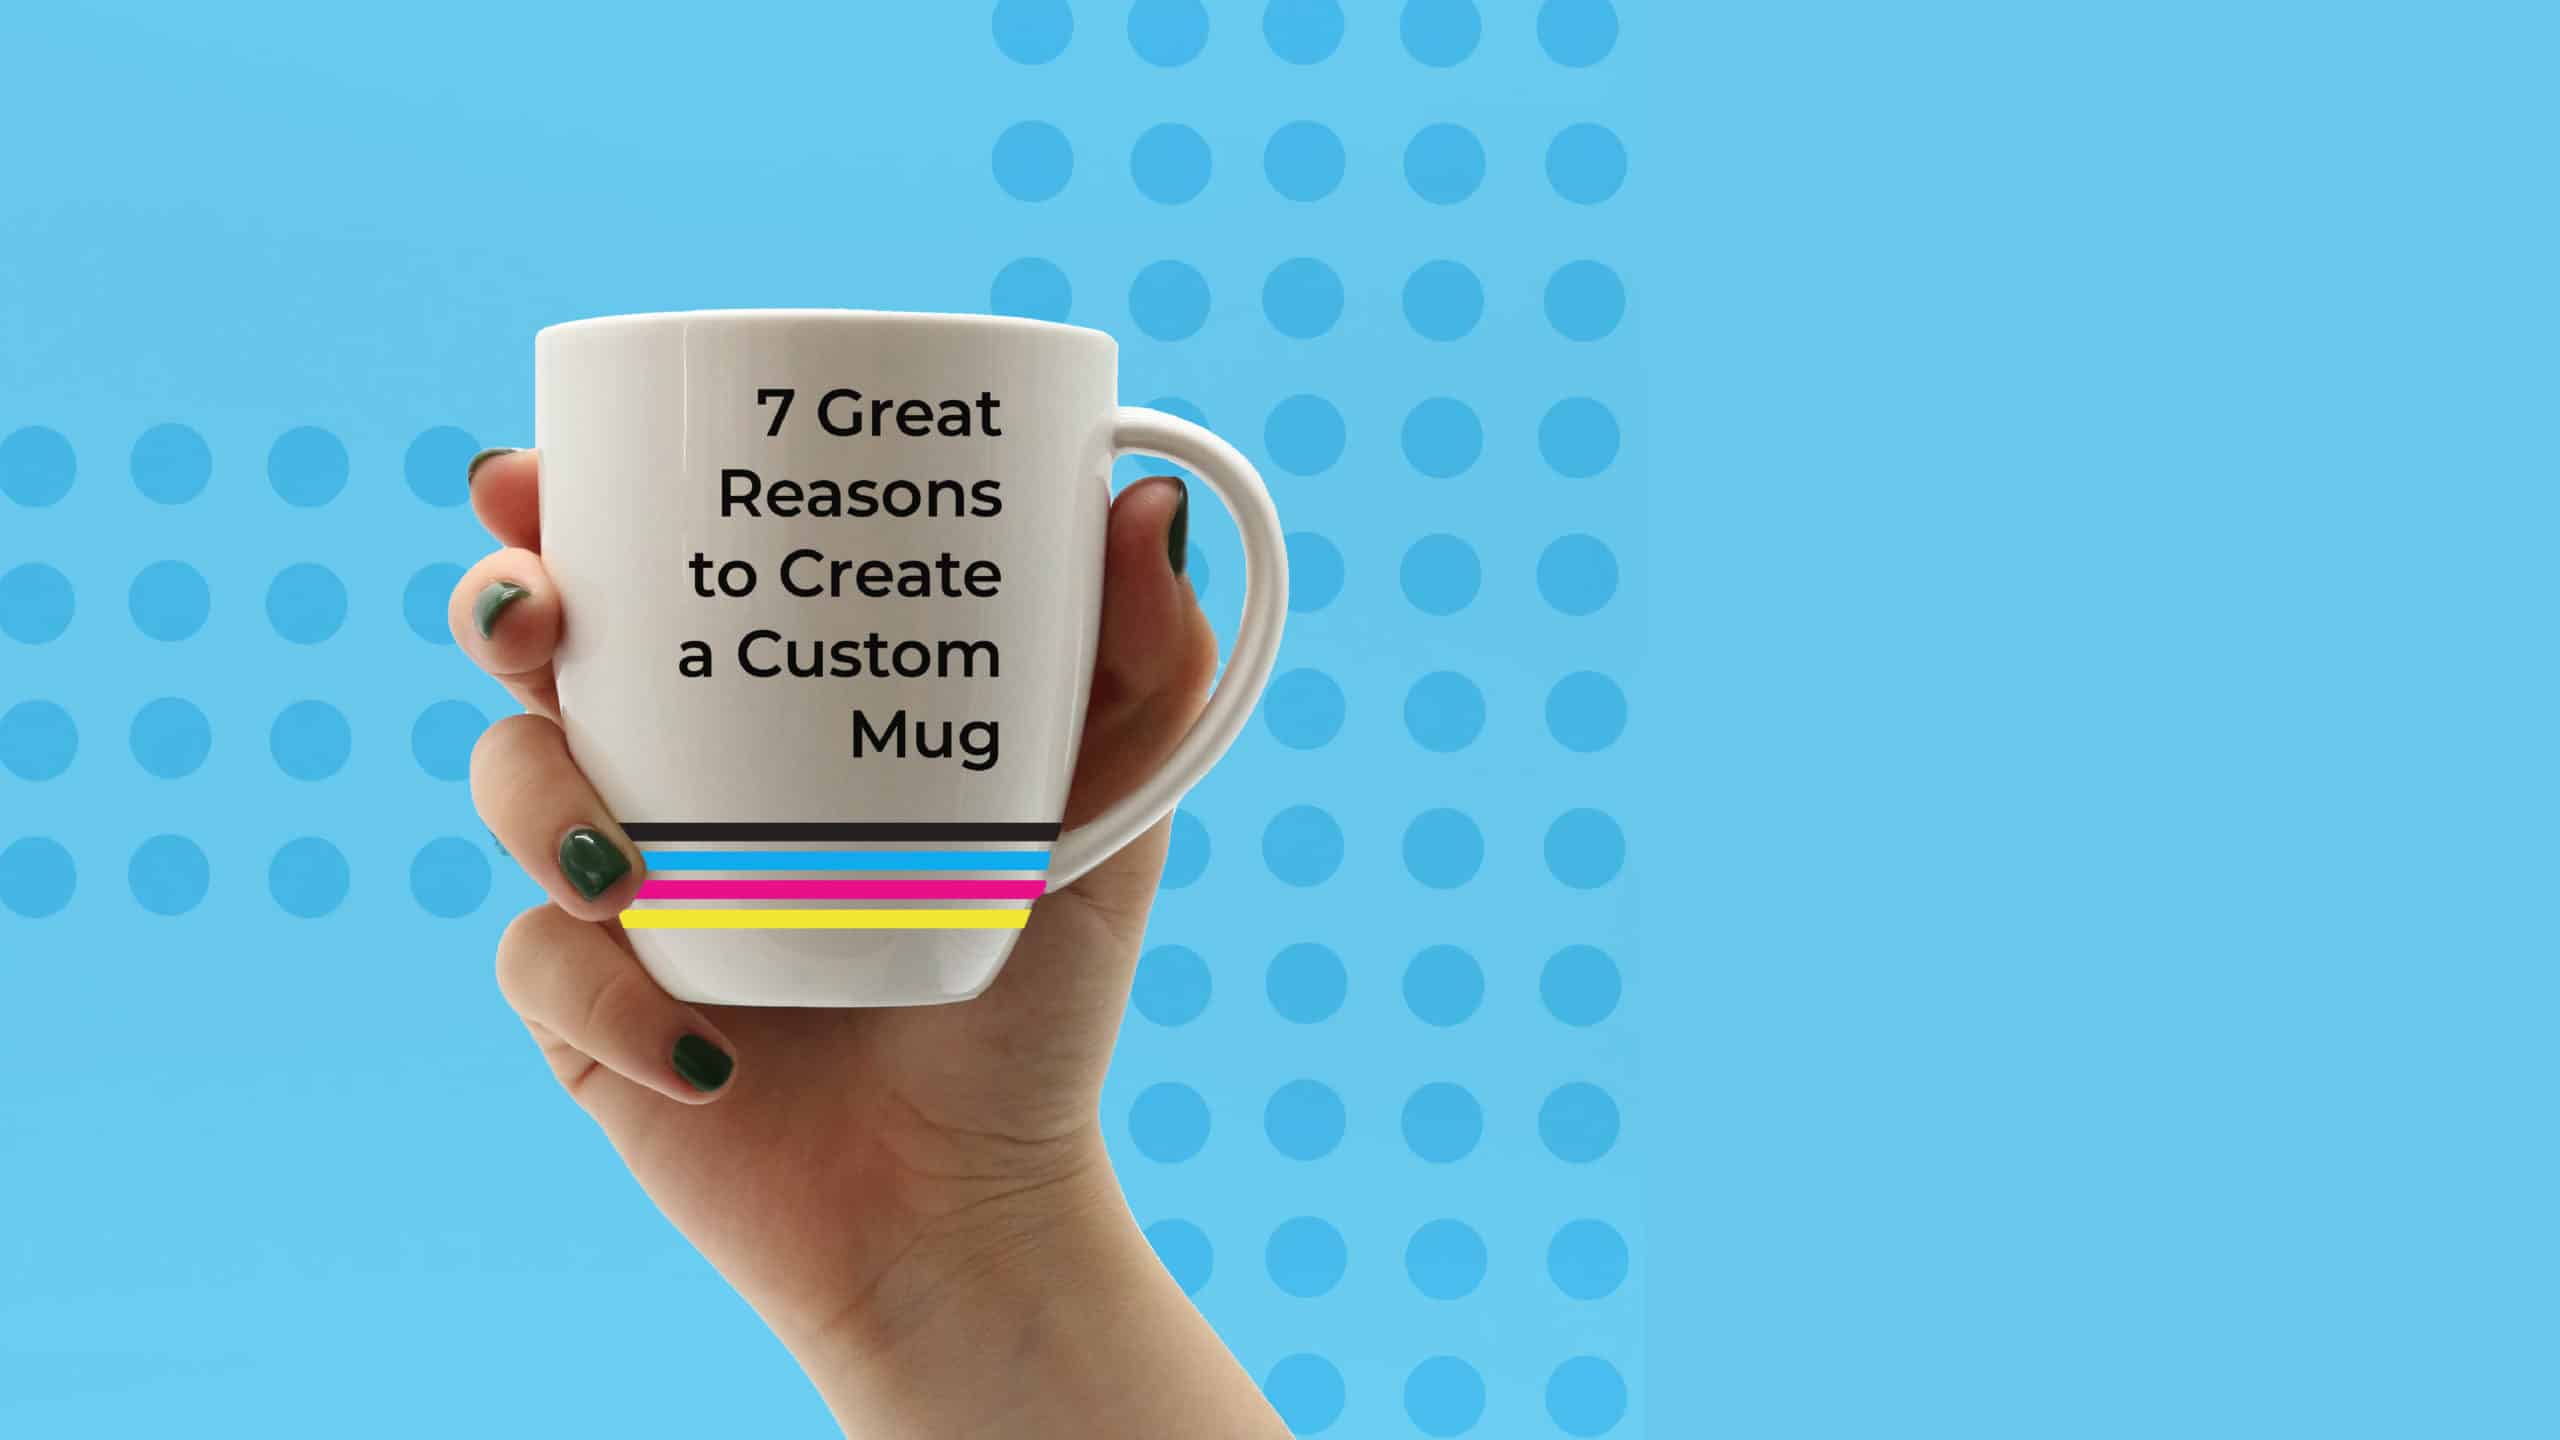 A custom-made coffee mug by Printasttik makes for a great personalized gift.